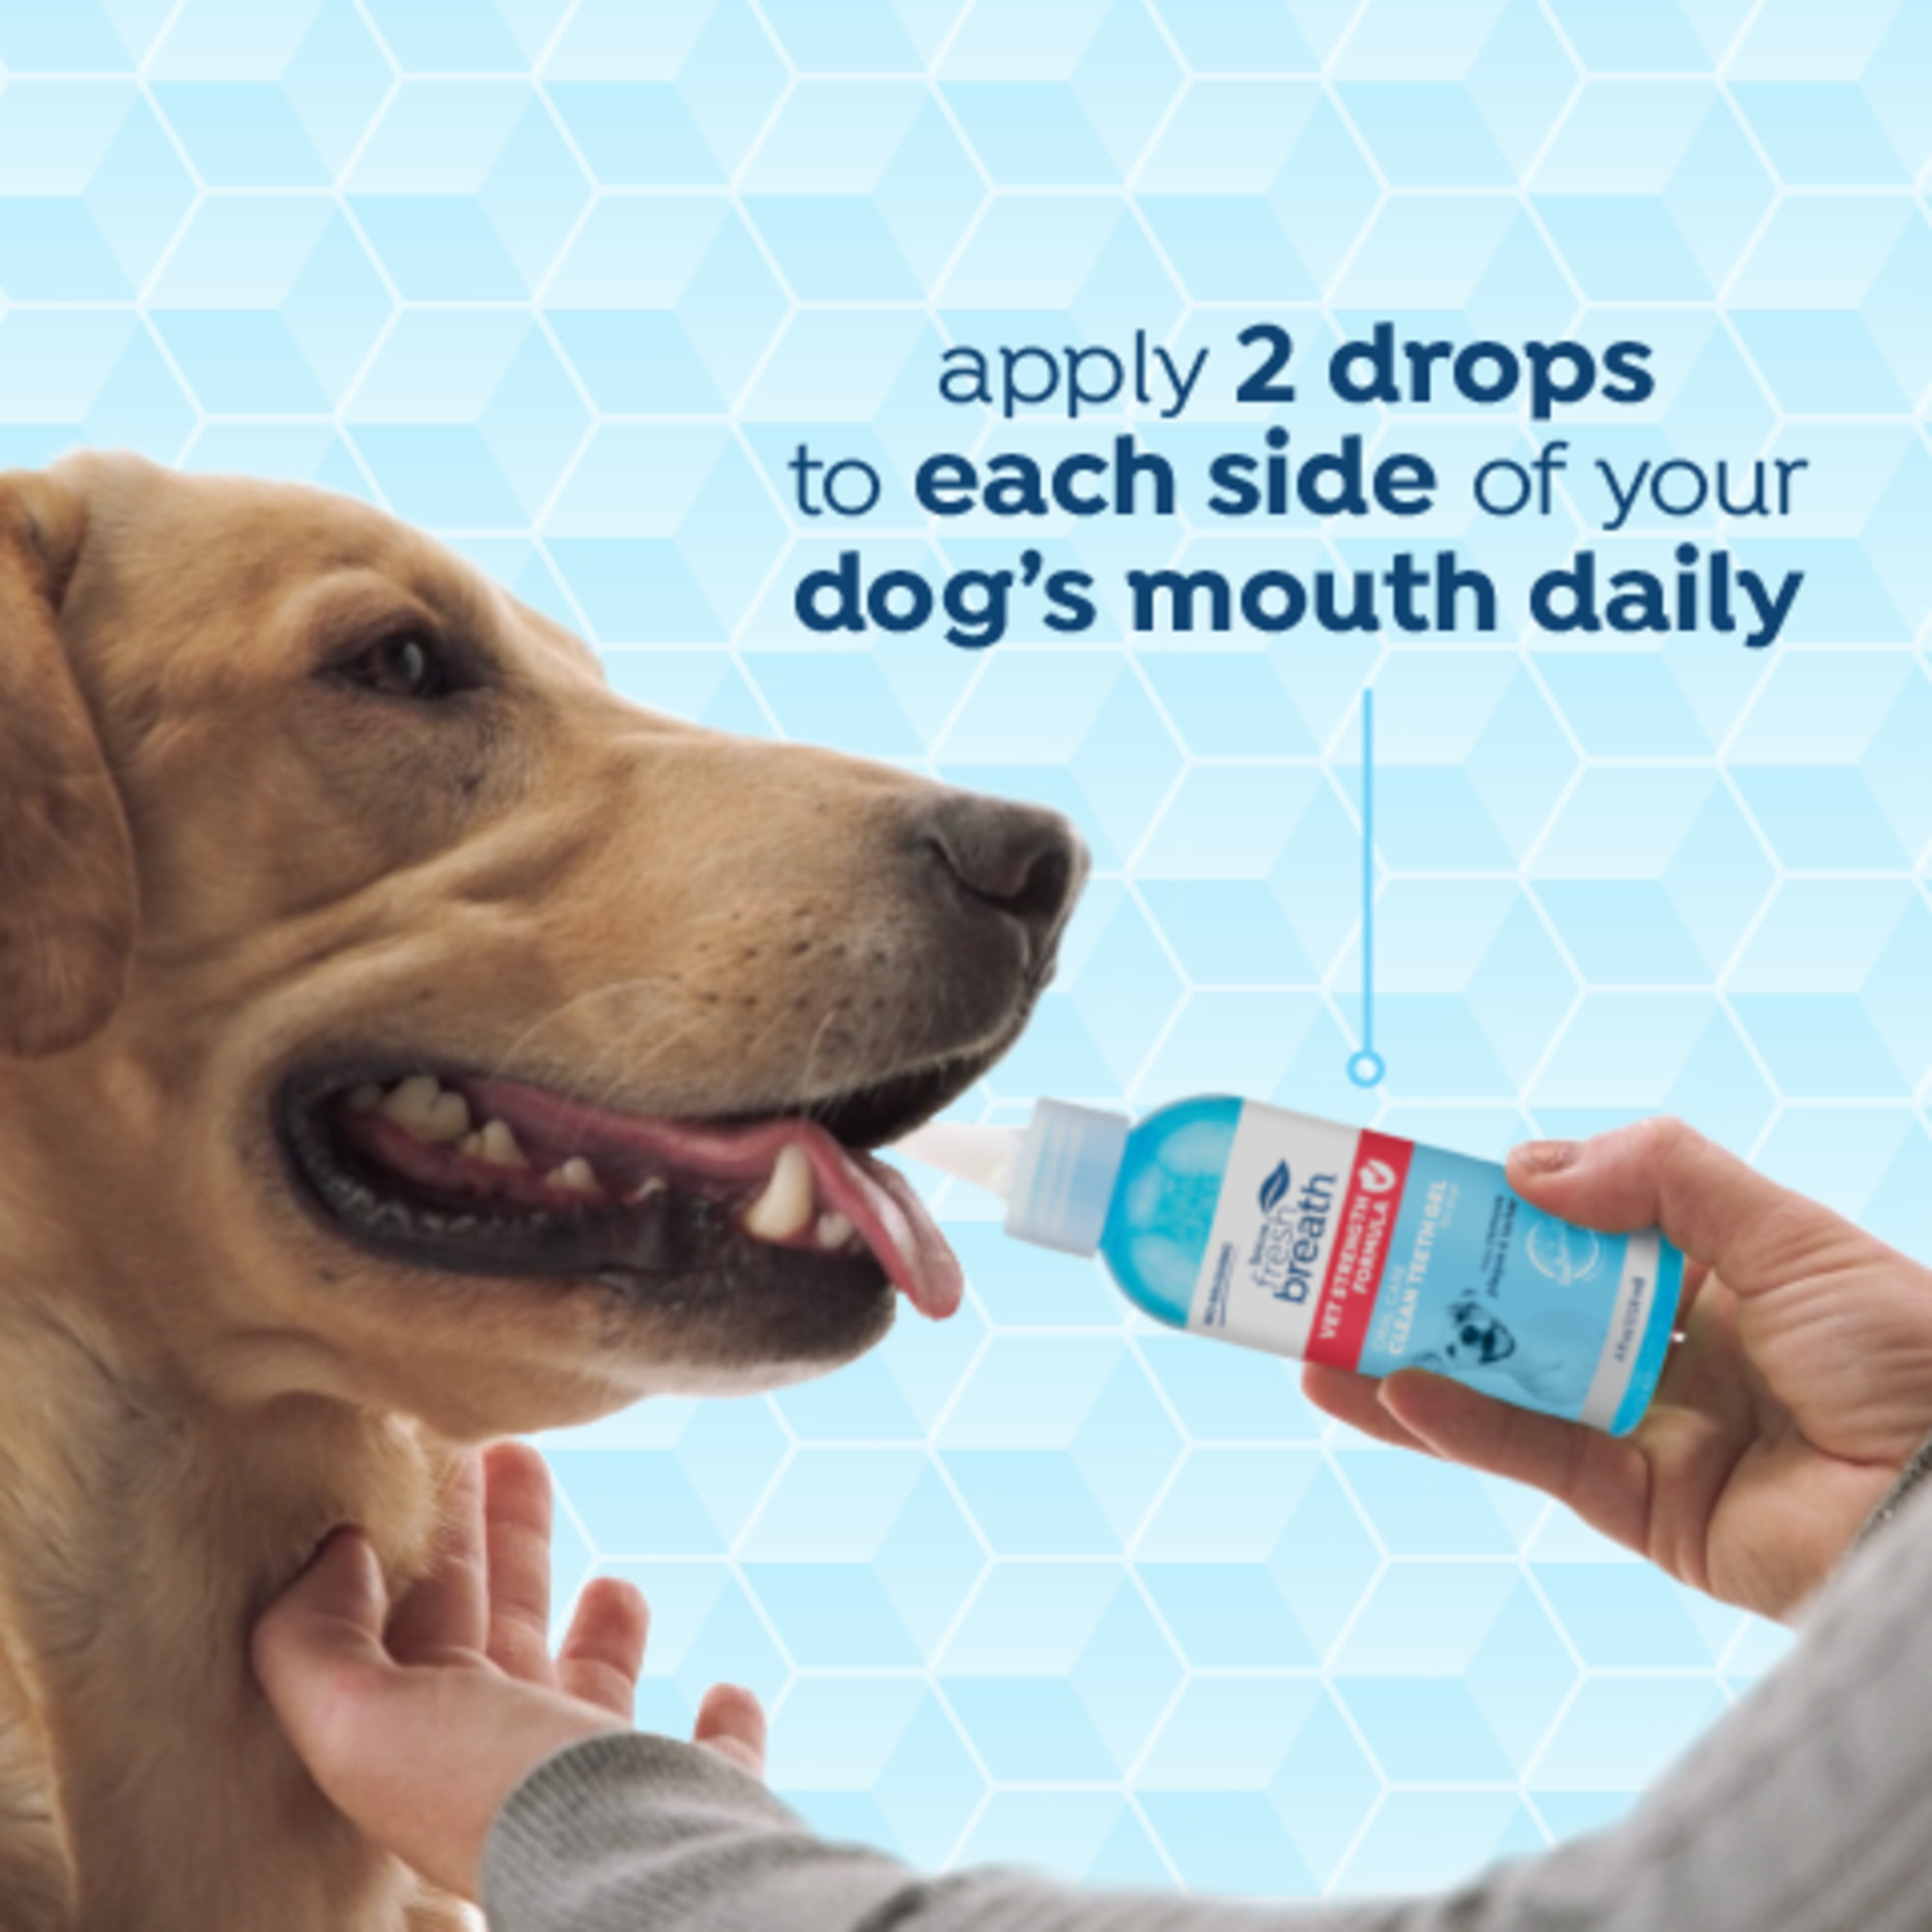 Vet Recommended Peanut Butter Oral Care Clean Teeth Gel for Dogs